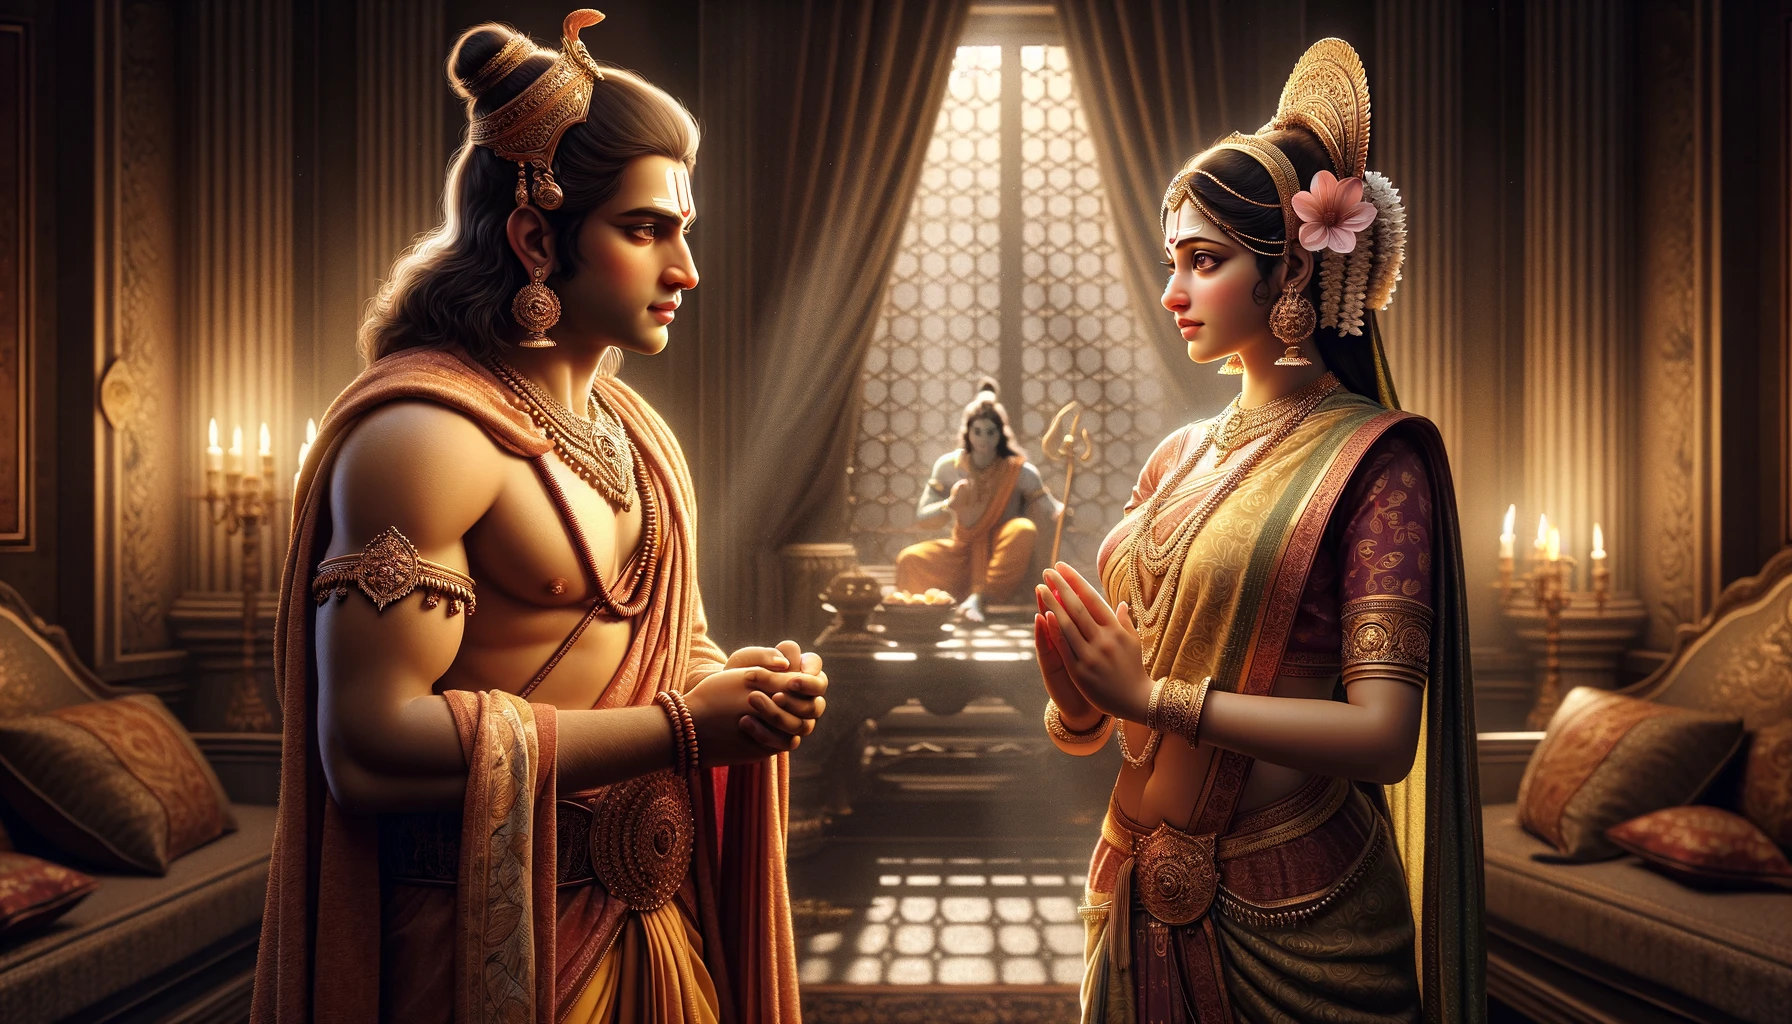 Sita Requests Rama to Take Her Along